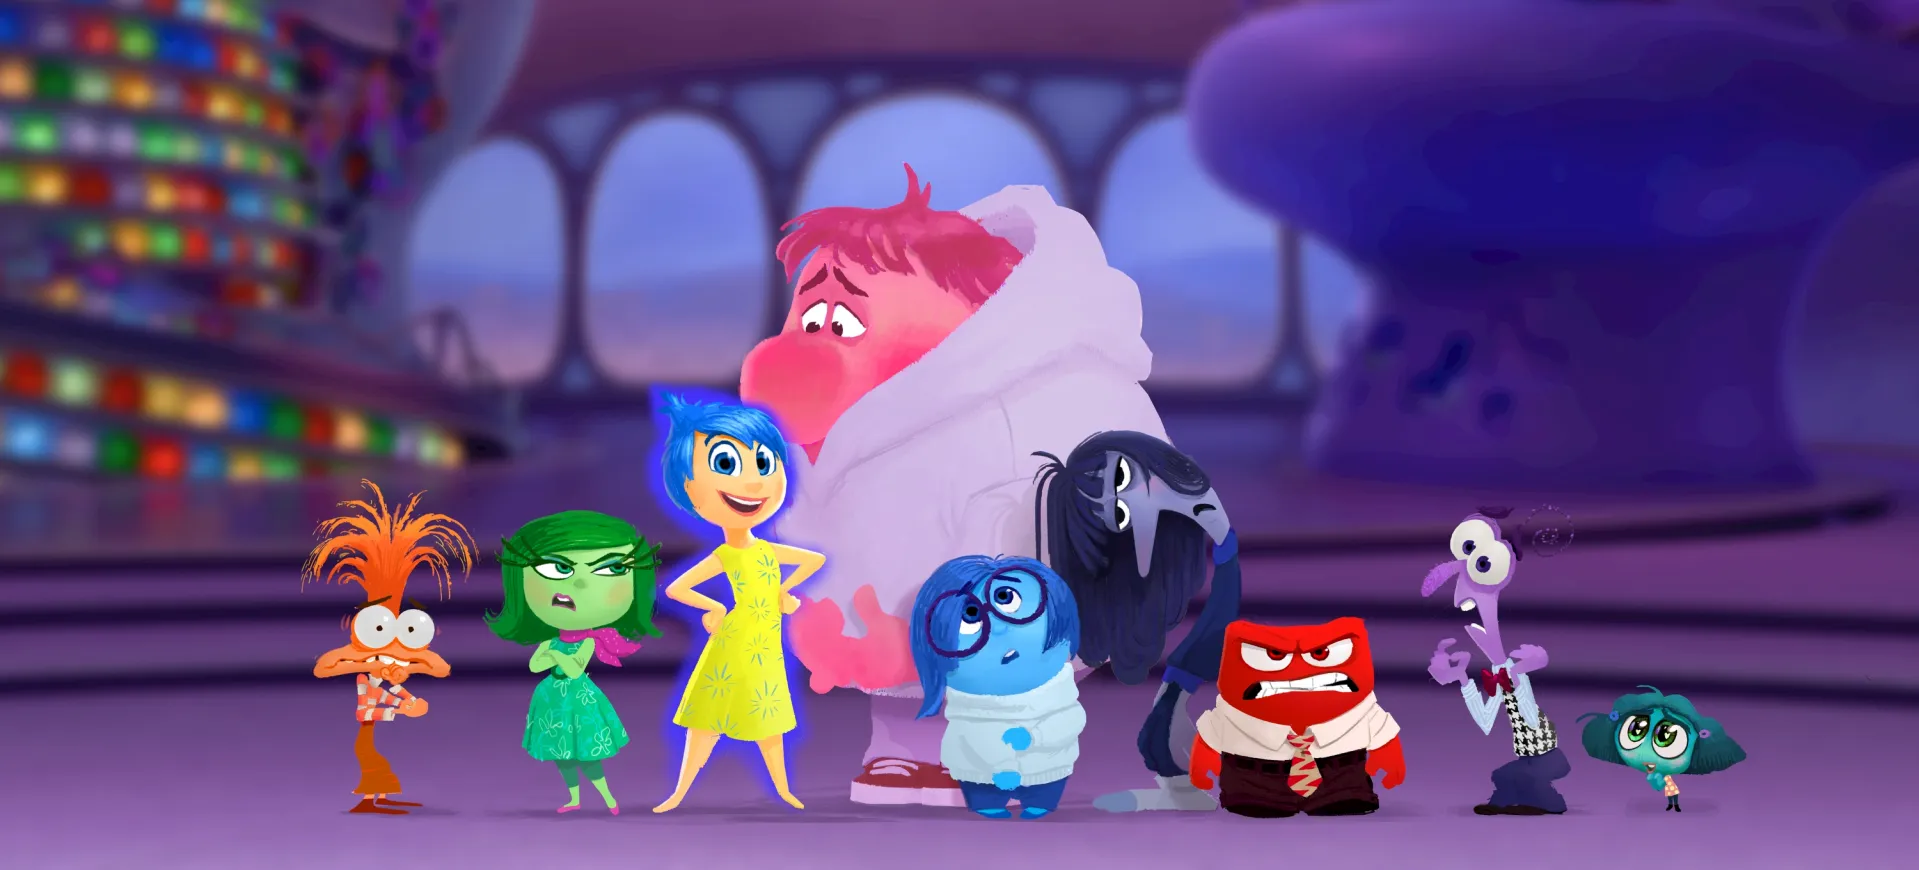 Inside Out 2_1a